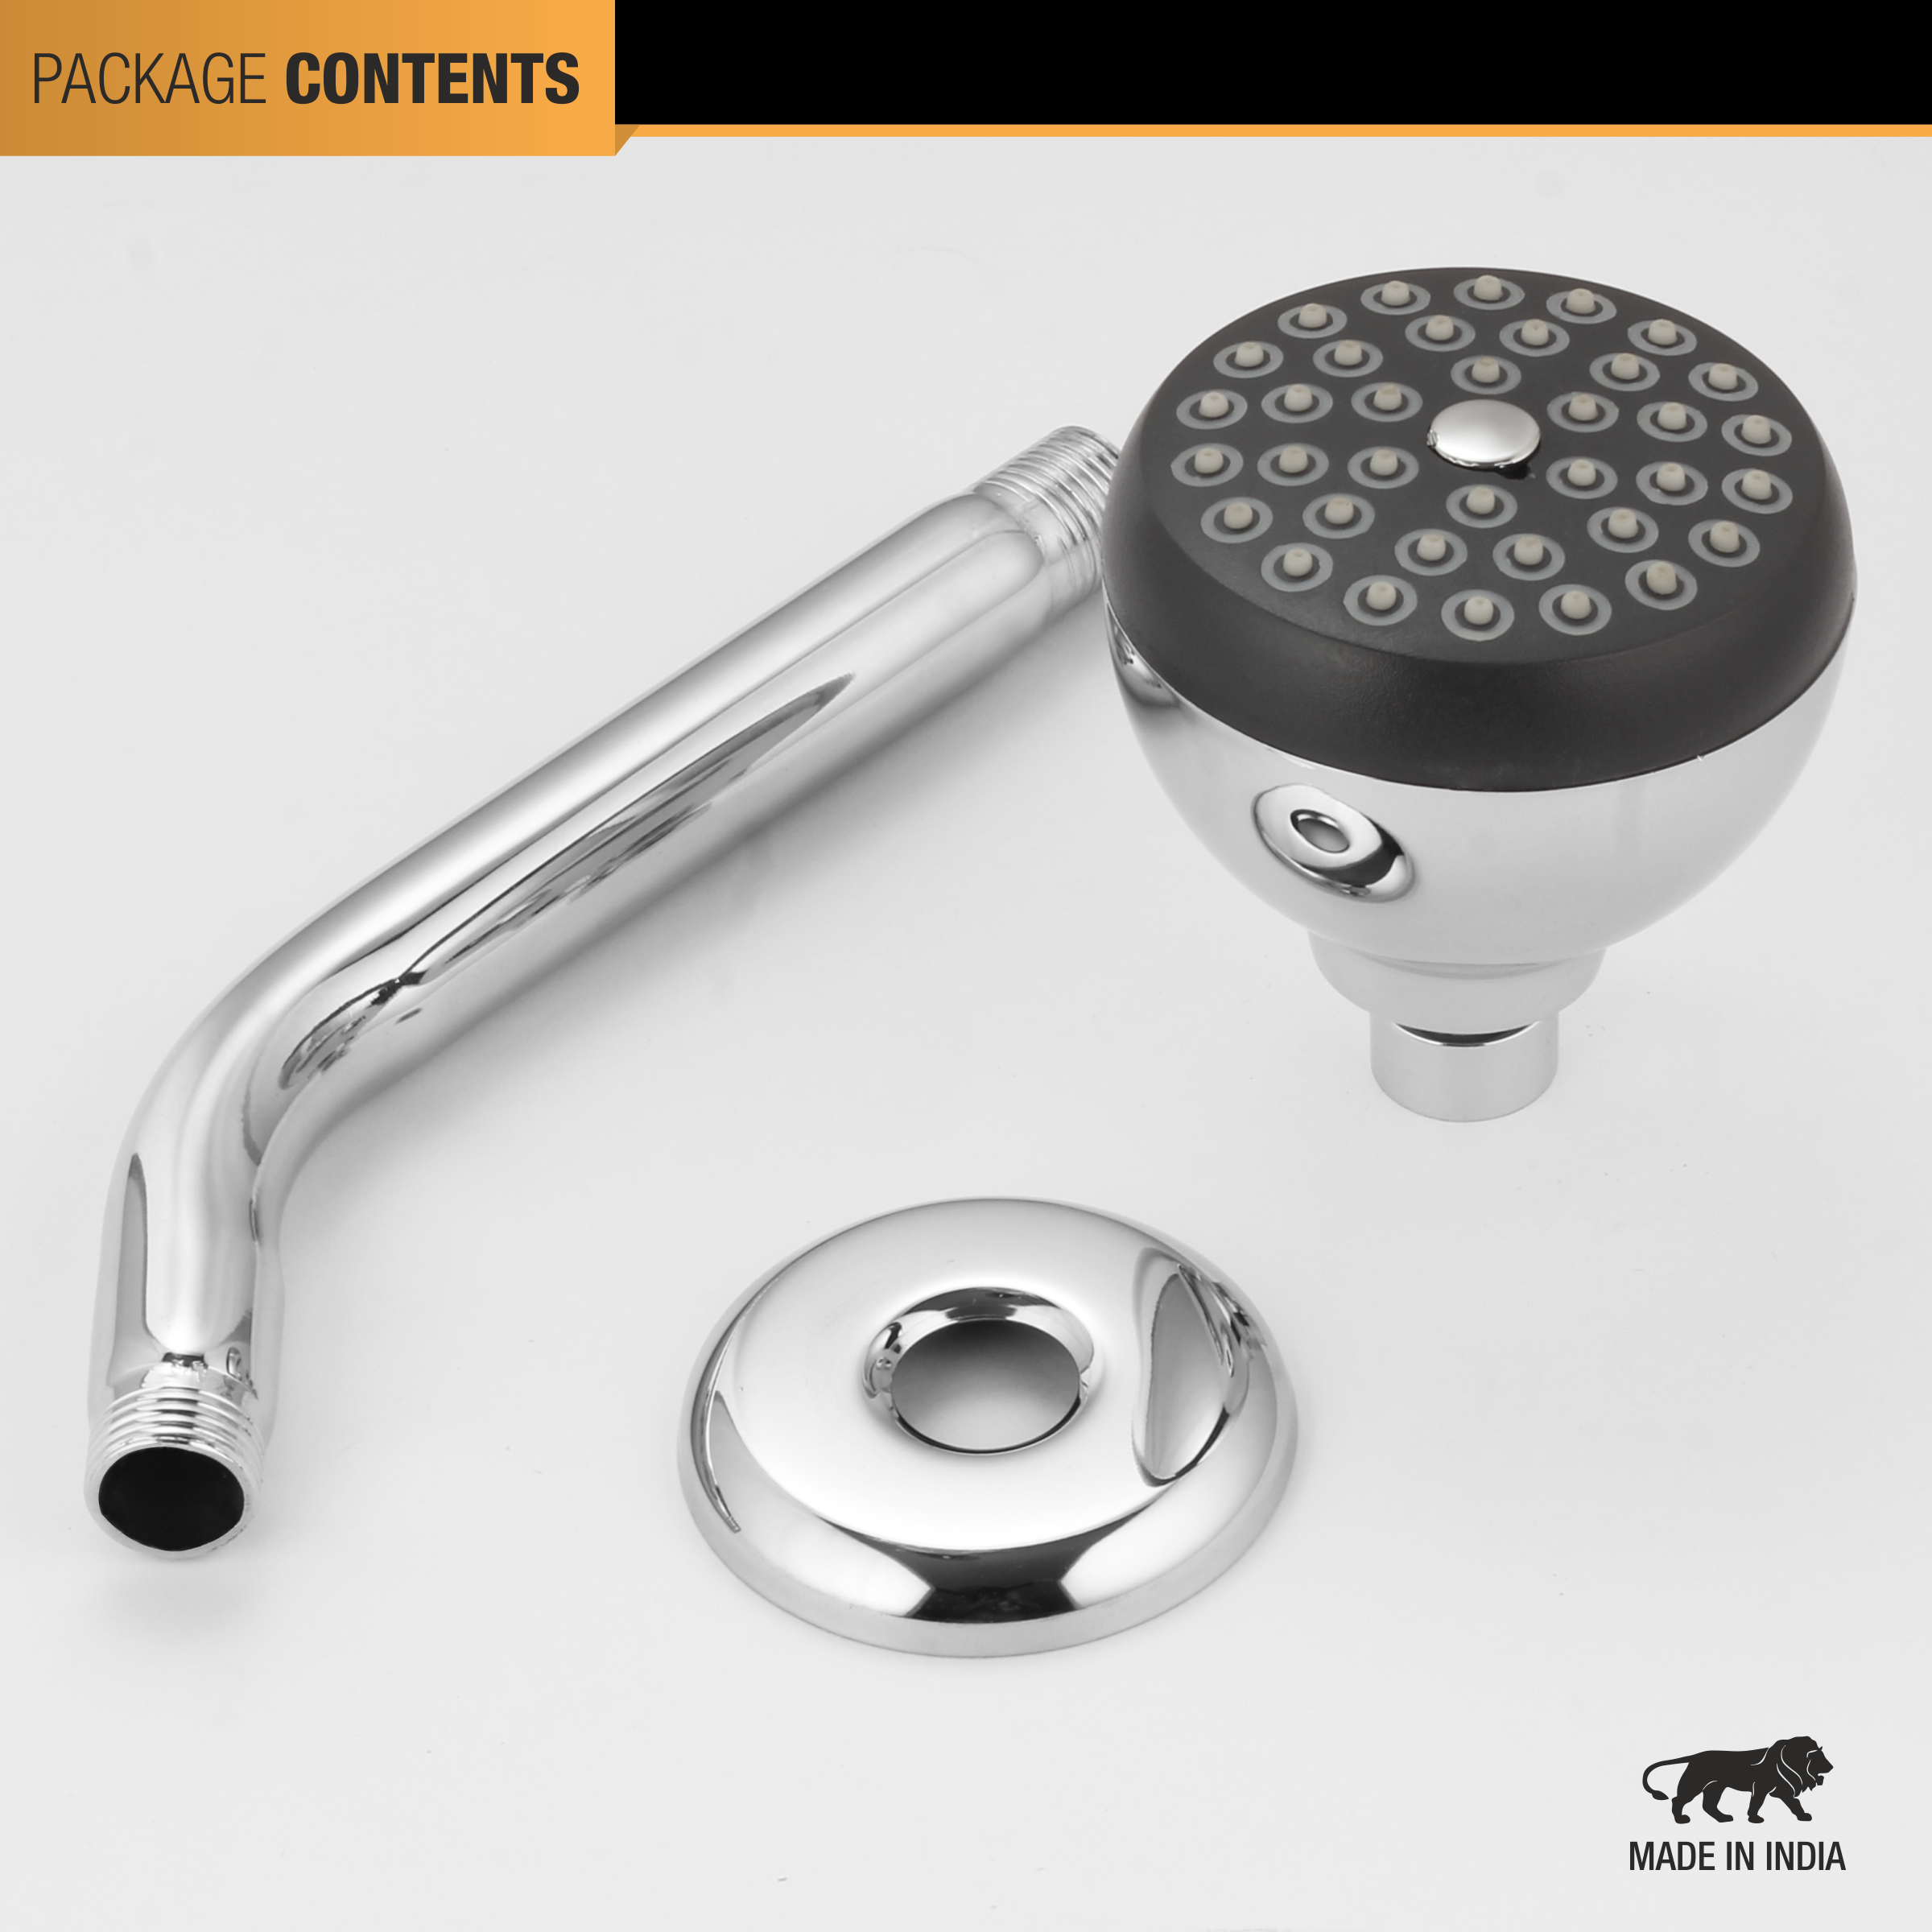 Beta Overhead Shower (3 Inches) with Shower Arm (12 Inches) package content